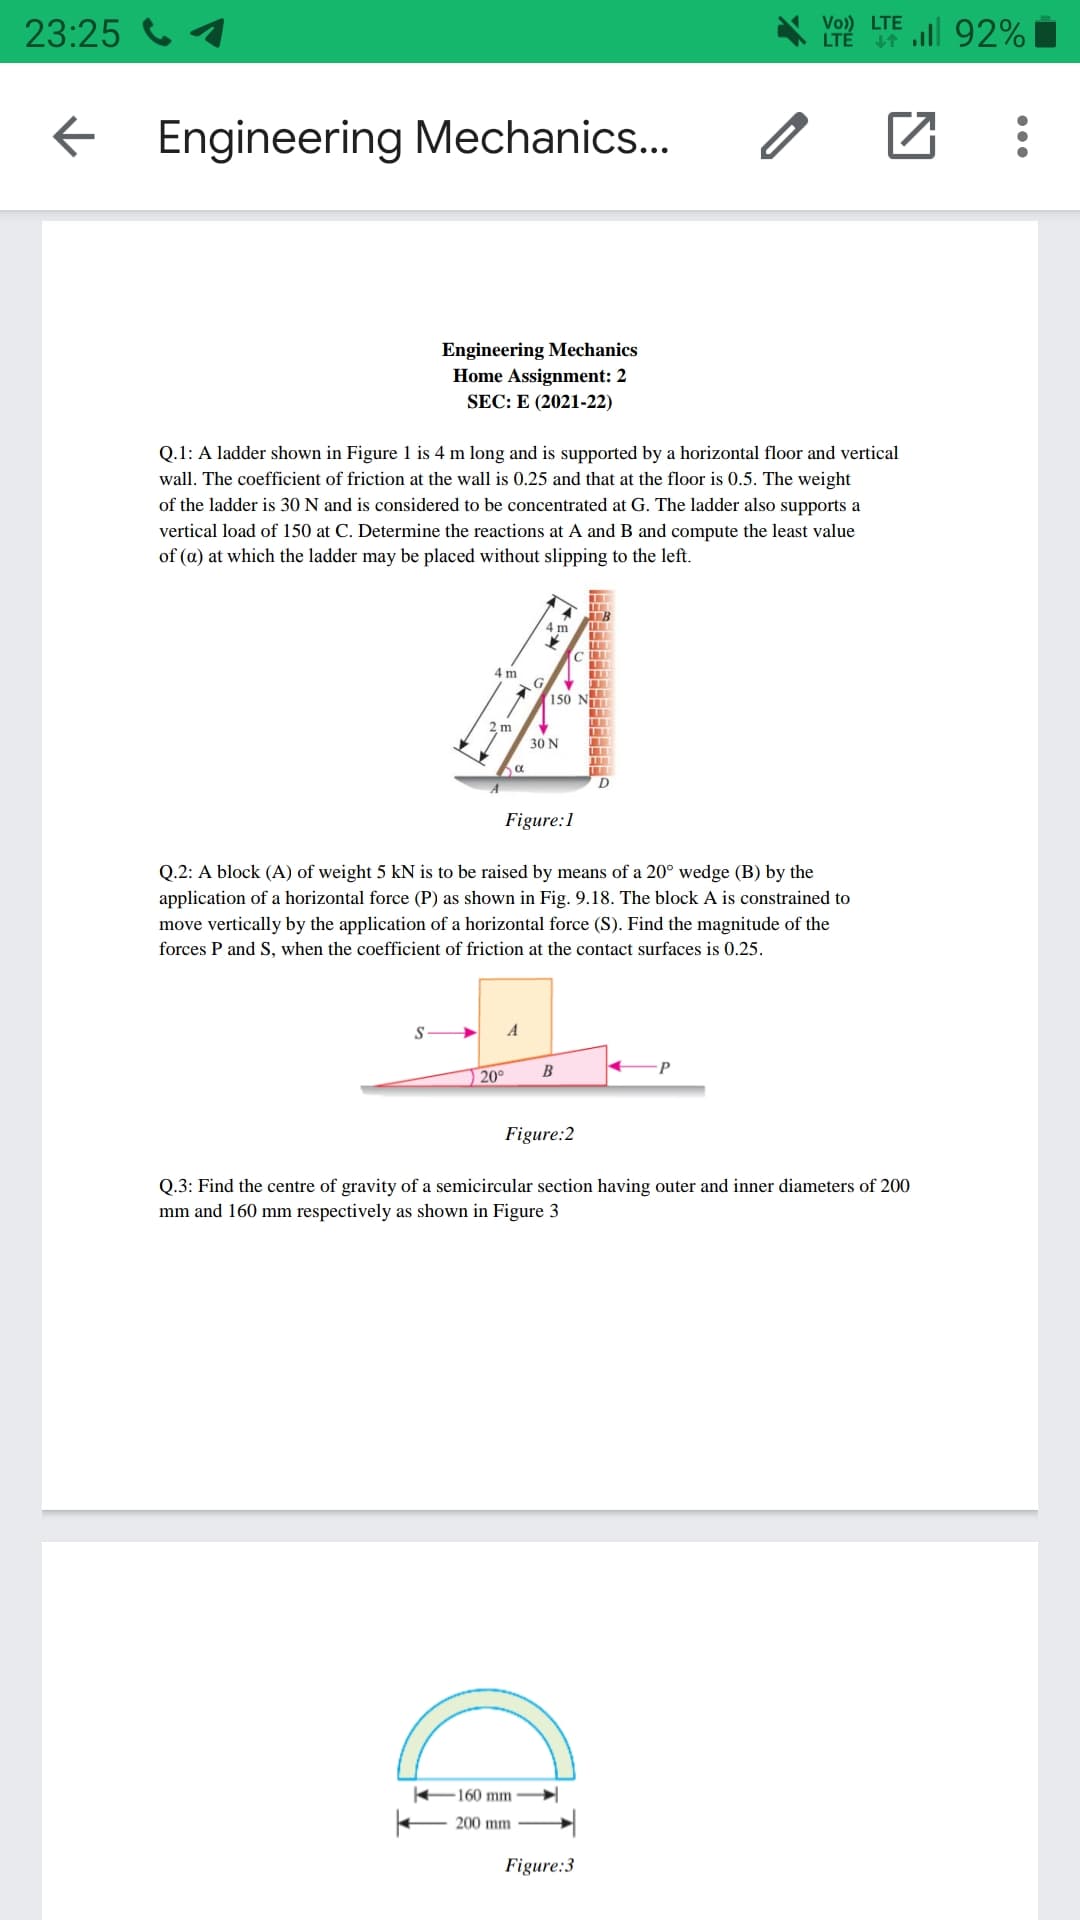 23:25 1
Vo)) LTE
LTÉ ll 92%
Engineering Mechanics...
Engineering Mechanics
Home Assignment: 2
SEC: E (2021-22)
Q.1: A ladder shown in Figure 1 is 4 m long and is supported by a horizontal floor and vertical
wall. The coefficient of friction at the wall is 0.25 and that at the floor is 0.5. The weight
of the ladder is 30 N and is considered to be concentrated at G. The ladder also supports a
vertical load of 150 at C. Determine the reactions at A and B and compute the least value
of (a) at which the ladder may be placed without slipping to the left.
4 m
4 m
G
150 NTT
2 m
30 N
Figure:1
Q.2: A block (A) of weight 5 kN is to be raised by means of a 20° wedge (B) by the
application of a horizontal force (P) as shown in Fig. 9.18. The block A is constrained to
move vertically by the application of a horizontal force (S). Find the magnitude of the
forces P and S, when the coefficient of friction at the contact surfaces is 0.25.
A
20°
B
Figure:2
Q.3: Find the centre of gravity of a semicircular section having outer and inner diameters of 200
mm and 160 mm respectively as shown in Figure 3
160 mm
200 mm
Figure:3
